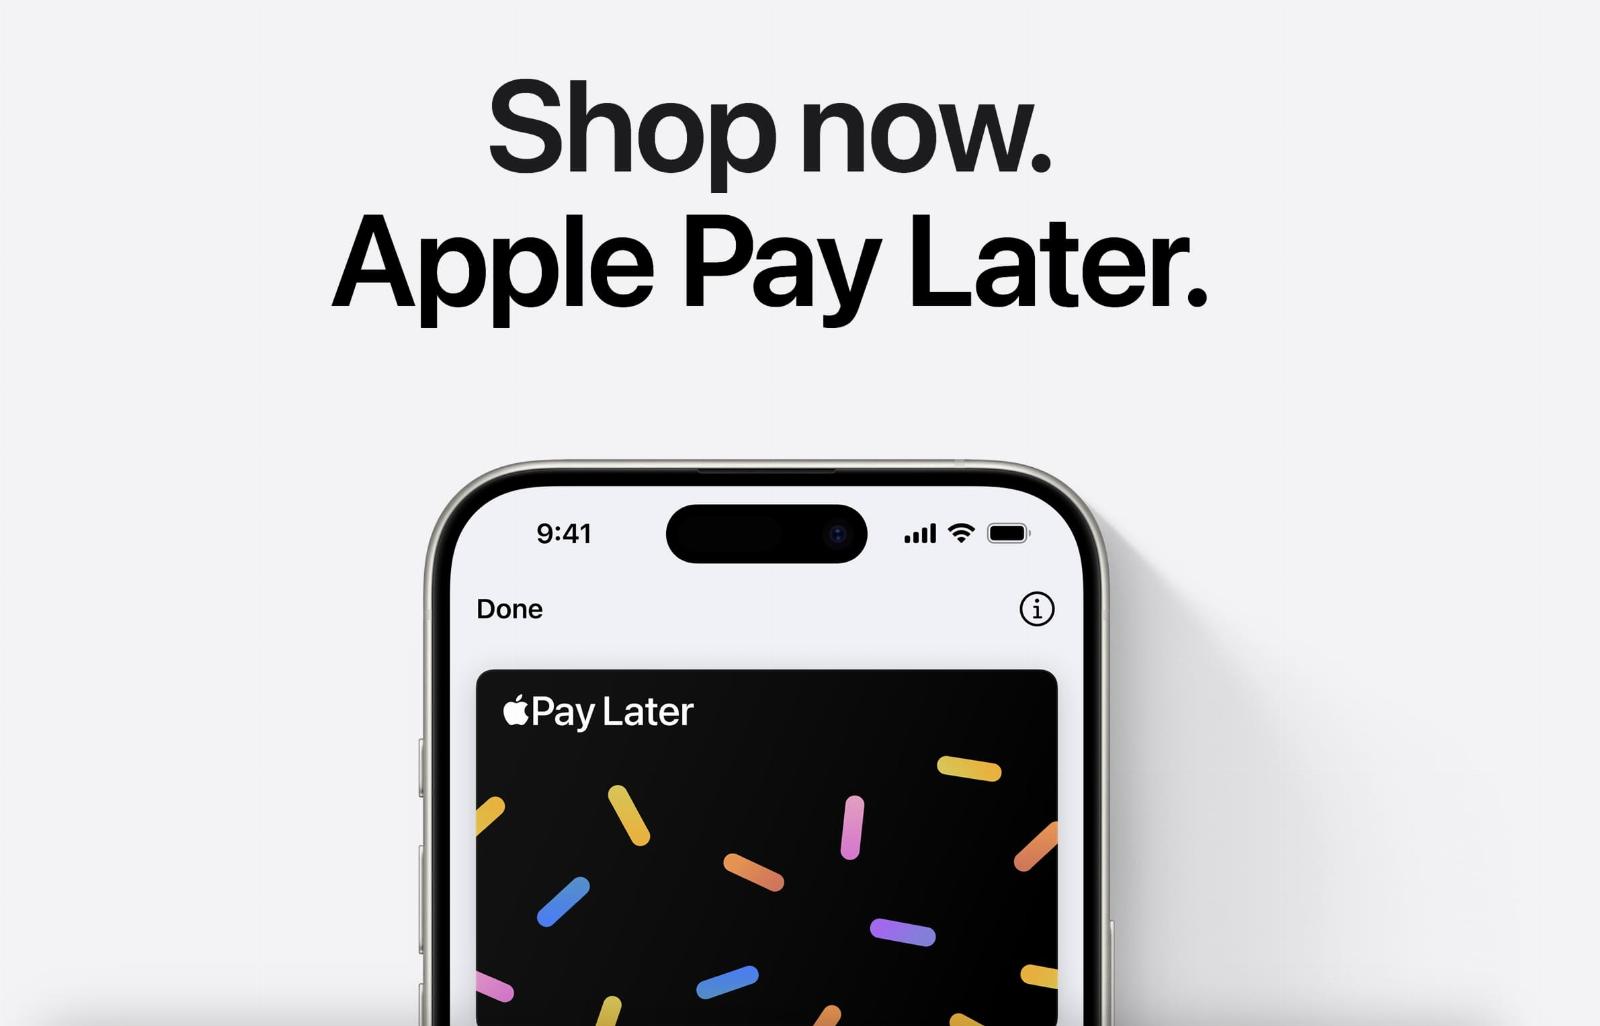 Apple Pay Later is now available to all users in the US